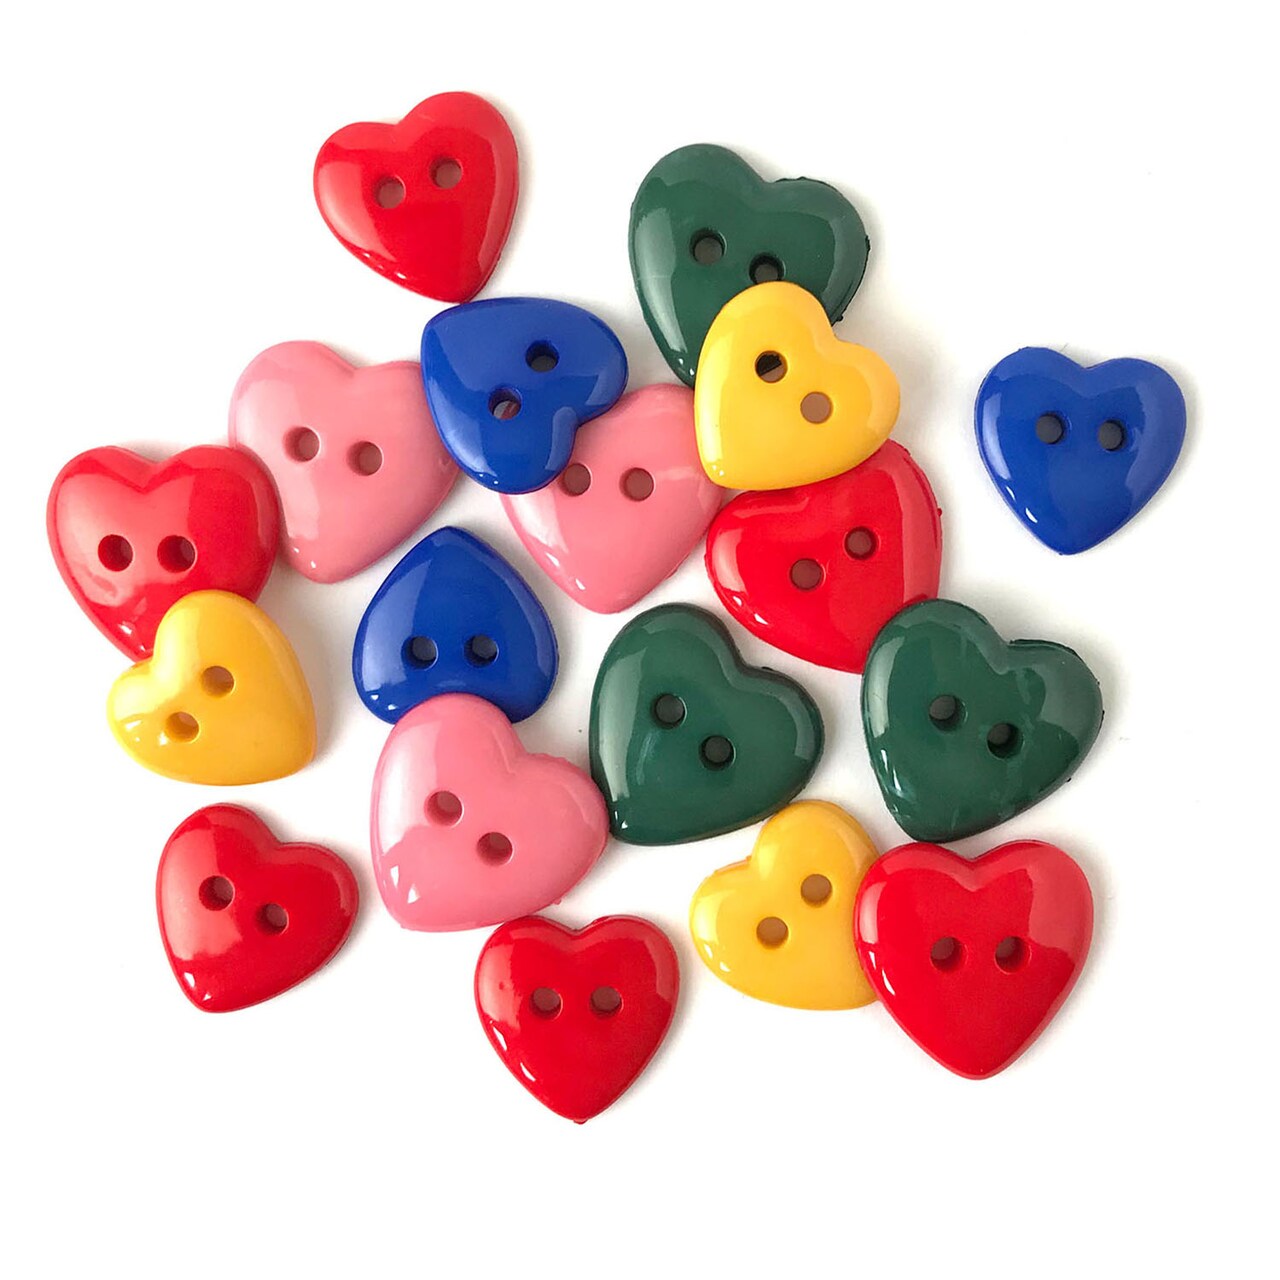 Buttons Galore and More Craft & Sewing Buttons - Heart of Color - 45 Buttons